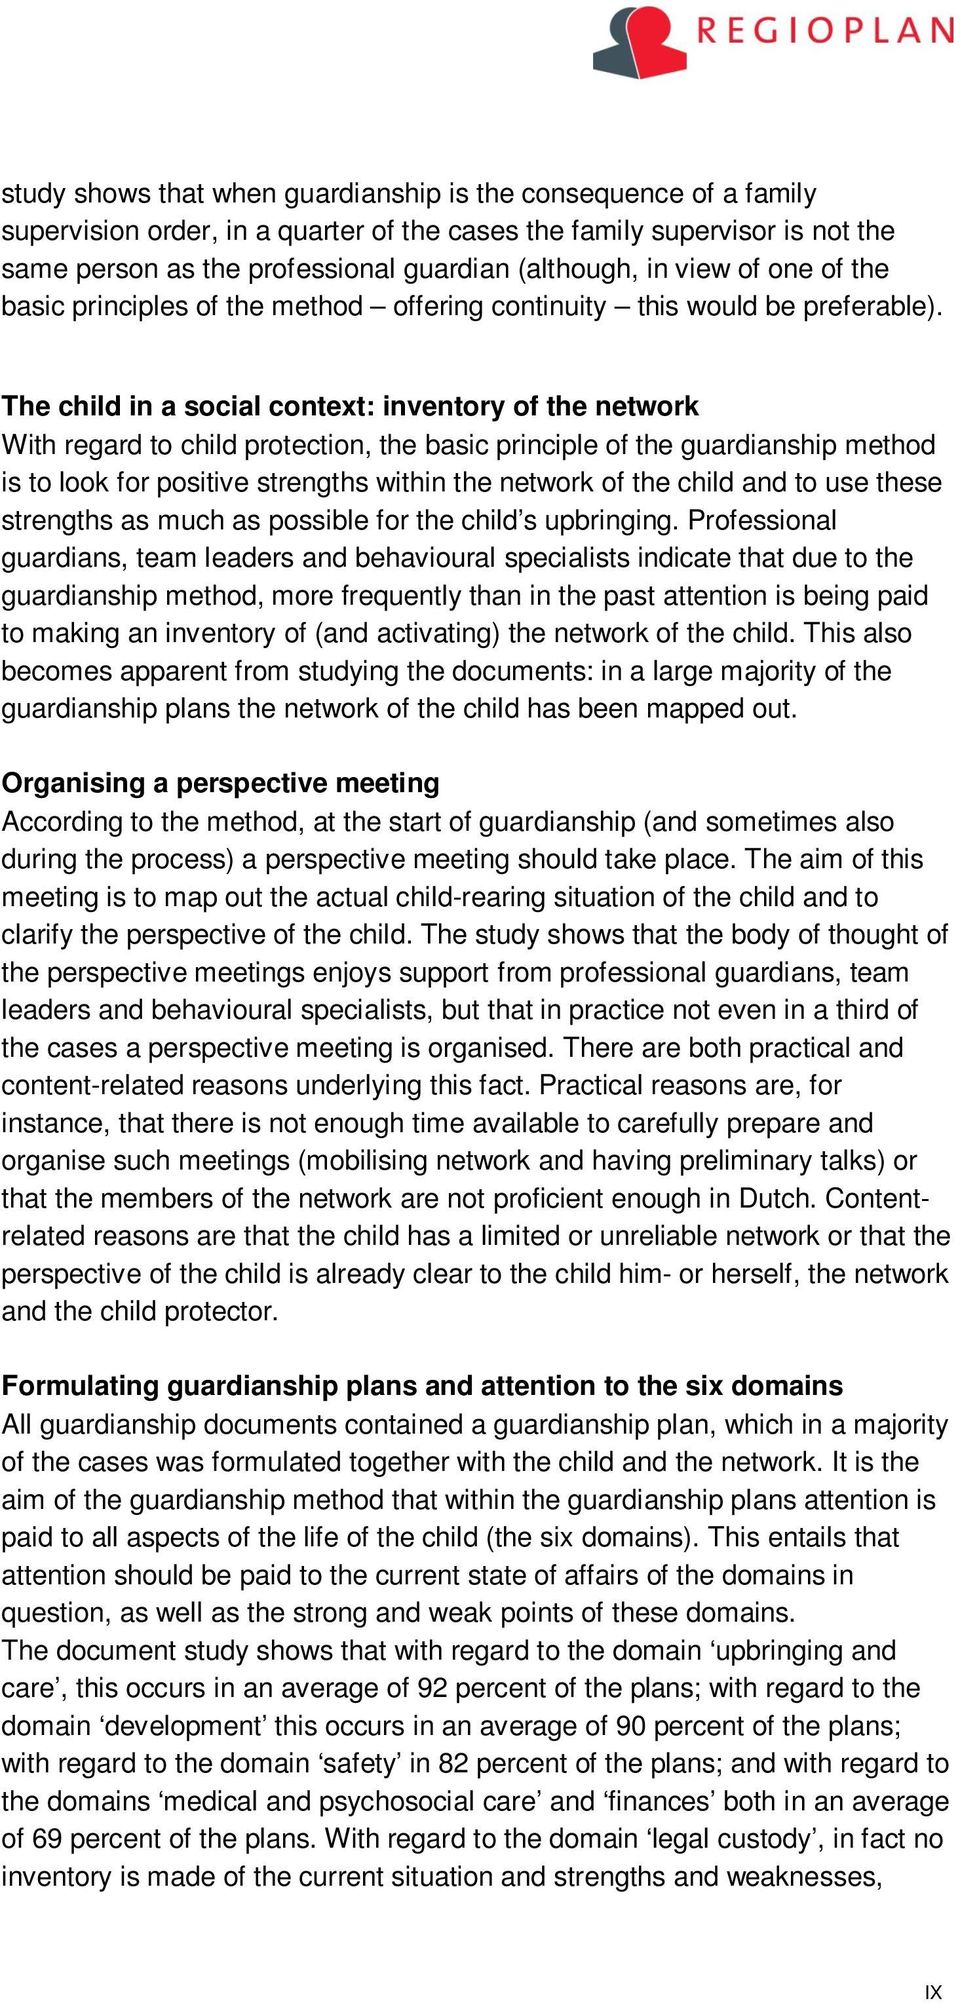 The child in a social context: inventory of the network With regard to child protection, the basic principle of the guardianship method is to look for positive strengths within the network of the